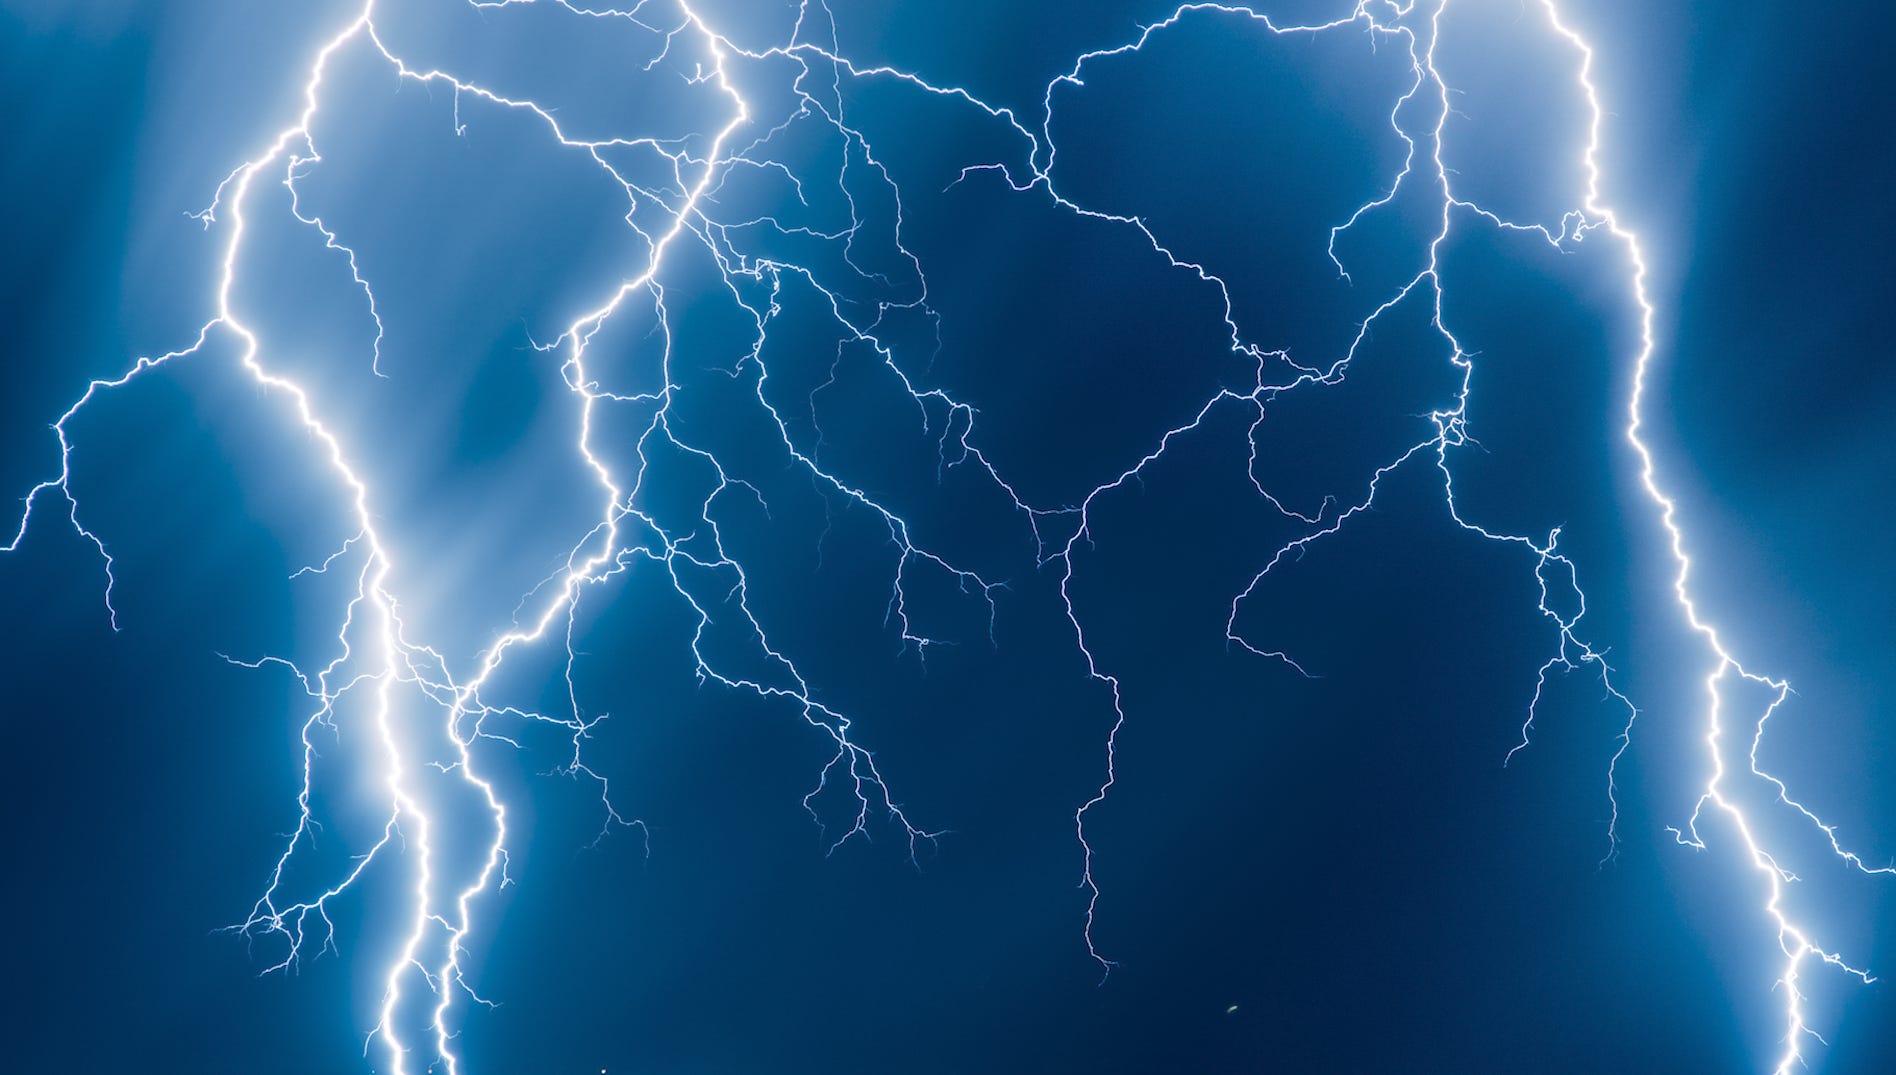 Lightning plays crucial role in cleaning the atmosphere, per new discovery